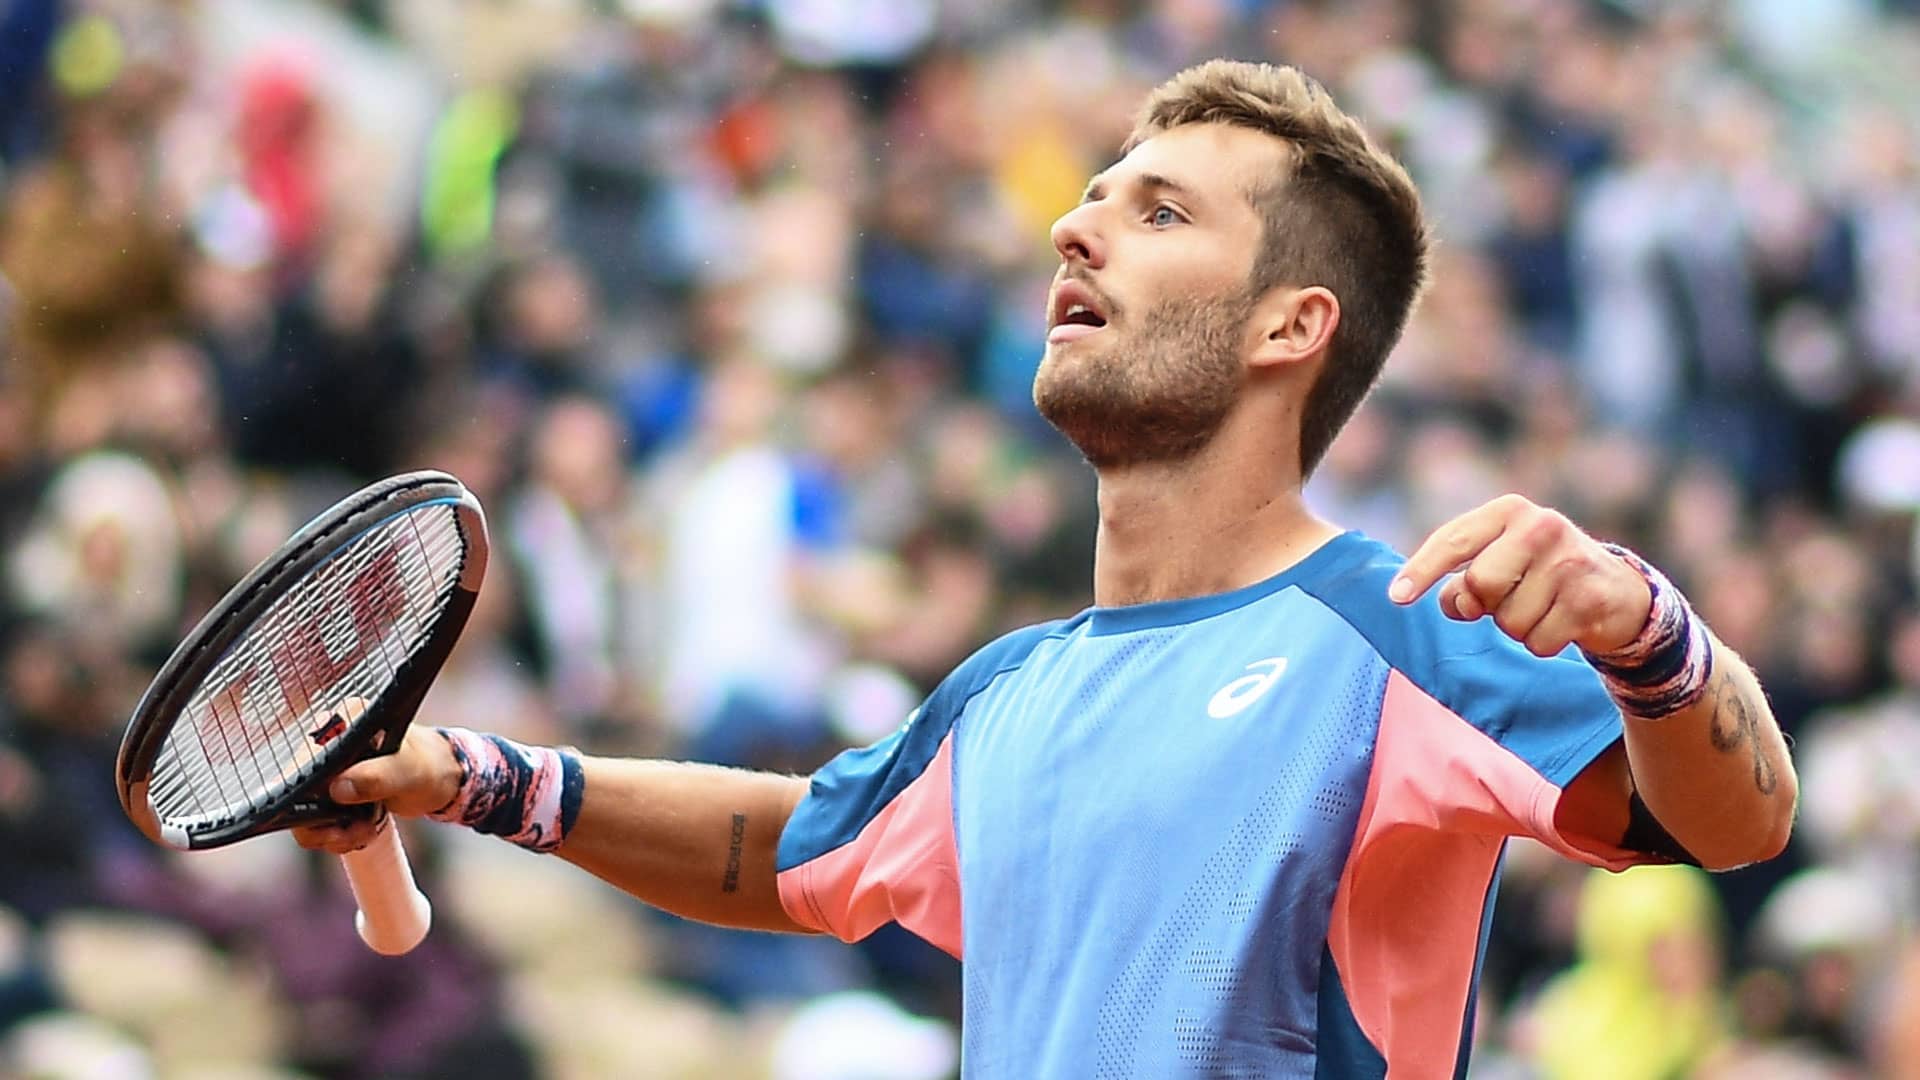 Corentin Moutet faces Rafael Nadal for the first time on Wednesday at Roland Garros.